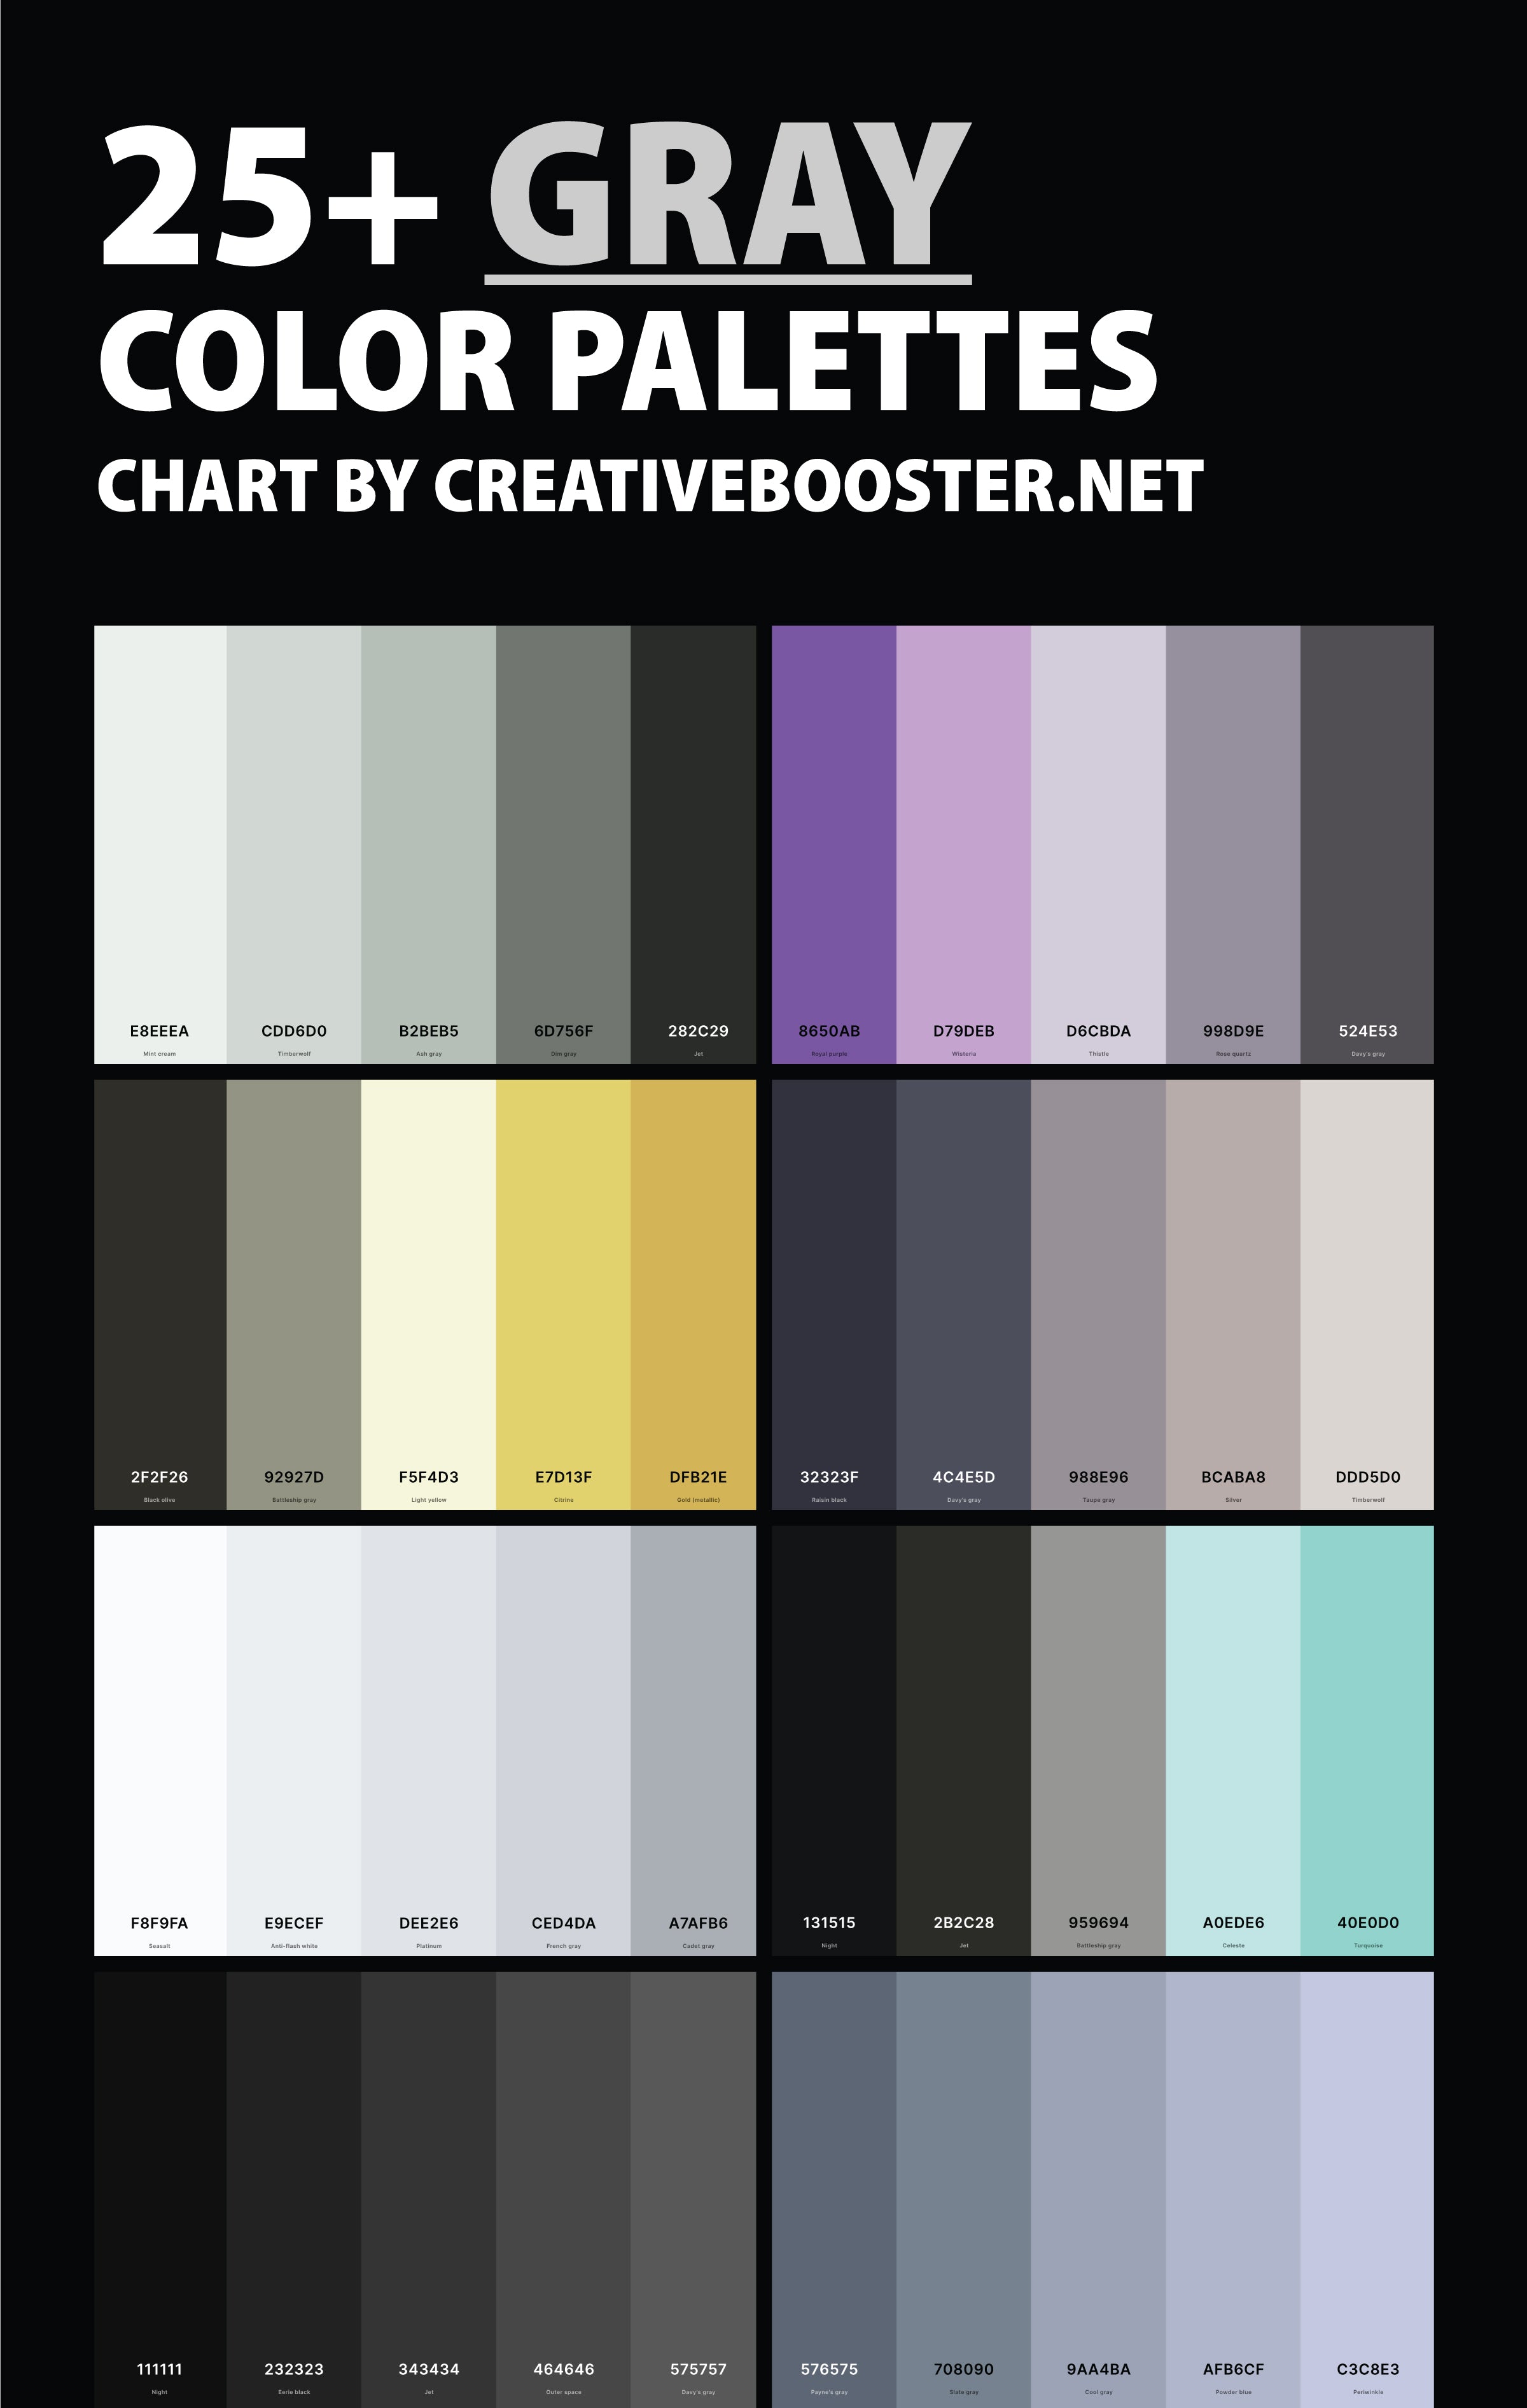 gray-color-palettes-chart-with-names-and-hex-codes-pinterest